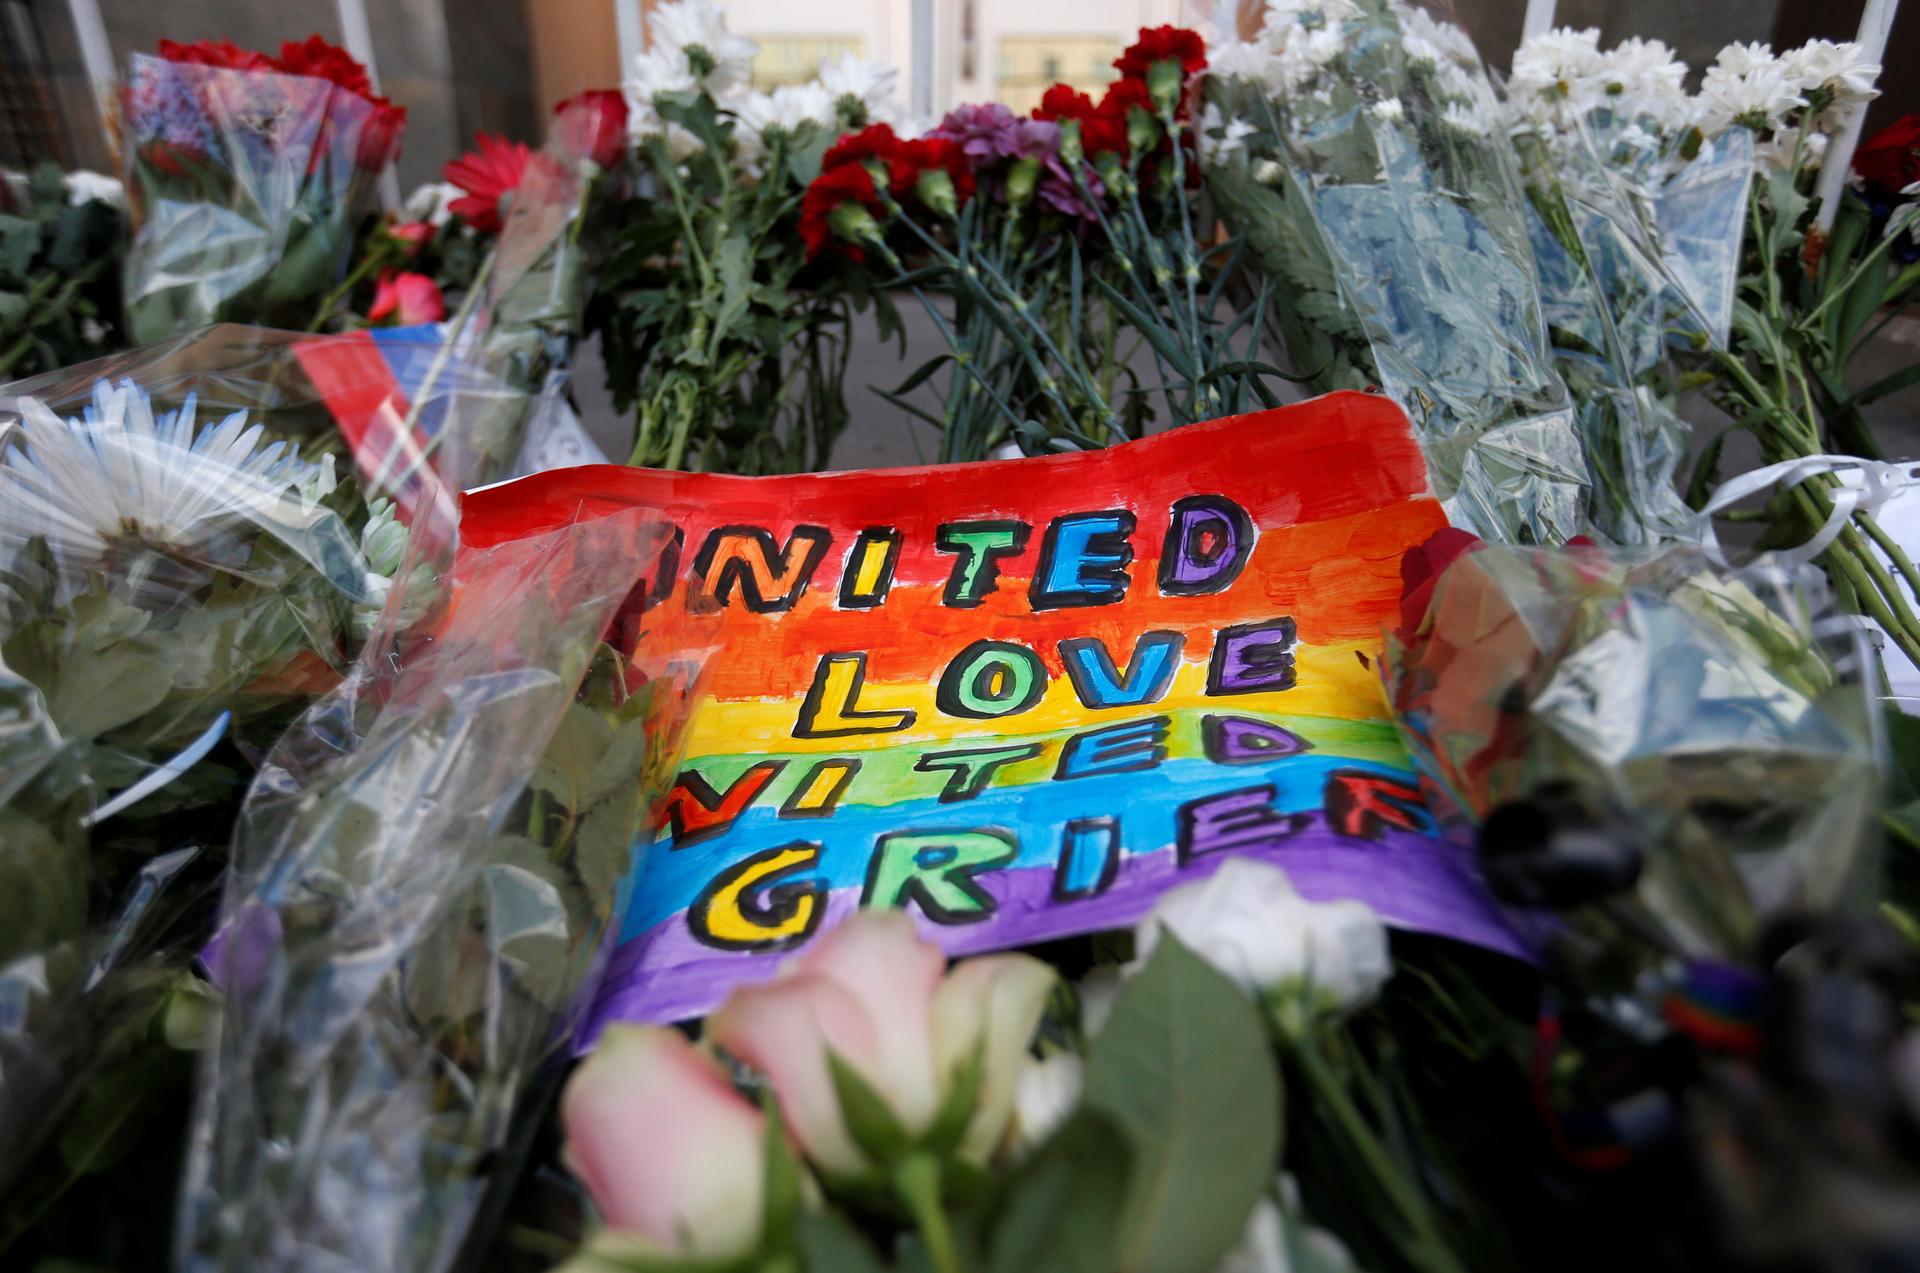 A placard and flowers for the victims of the shooting at a gay nightclub in Orlando are seen in front of the U.S. Embassy in Moscow, Russia, June 13, 2016.